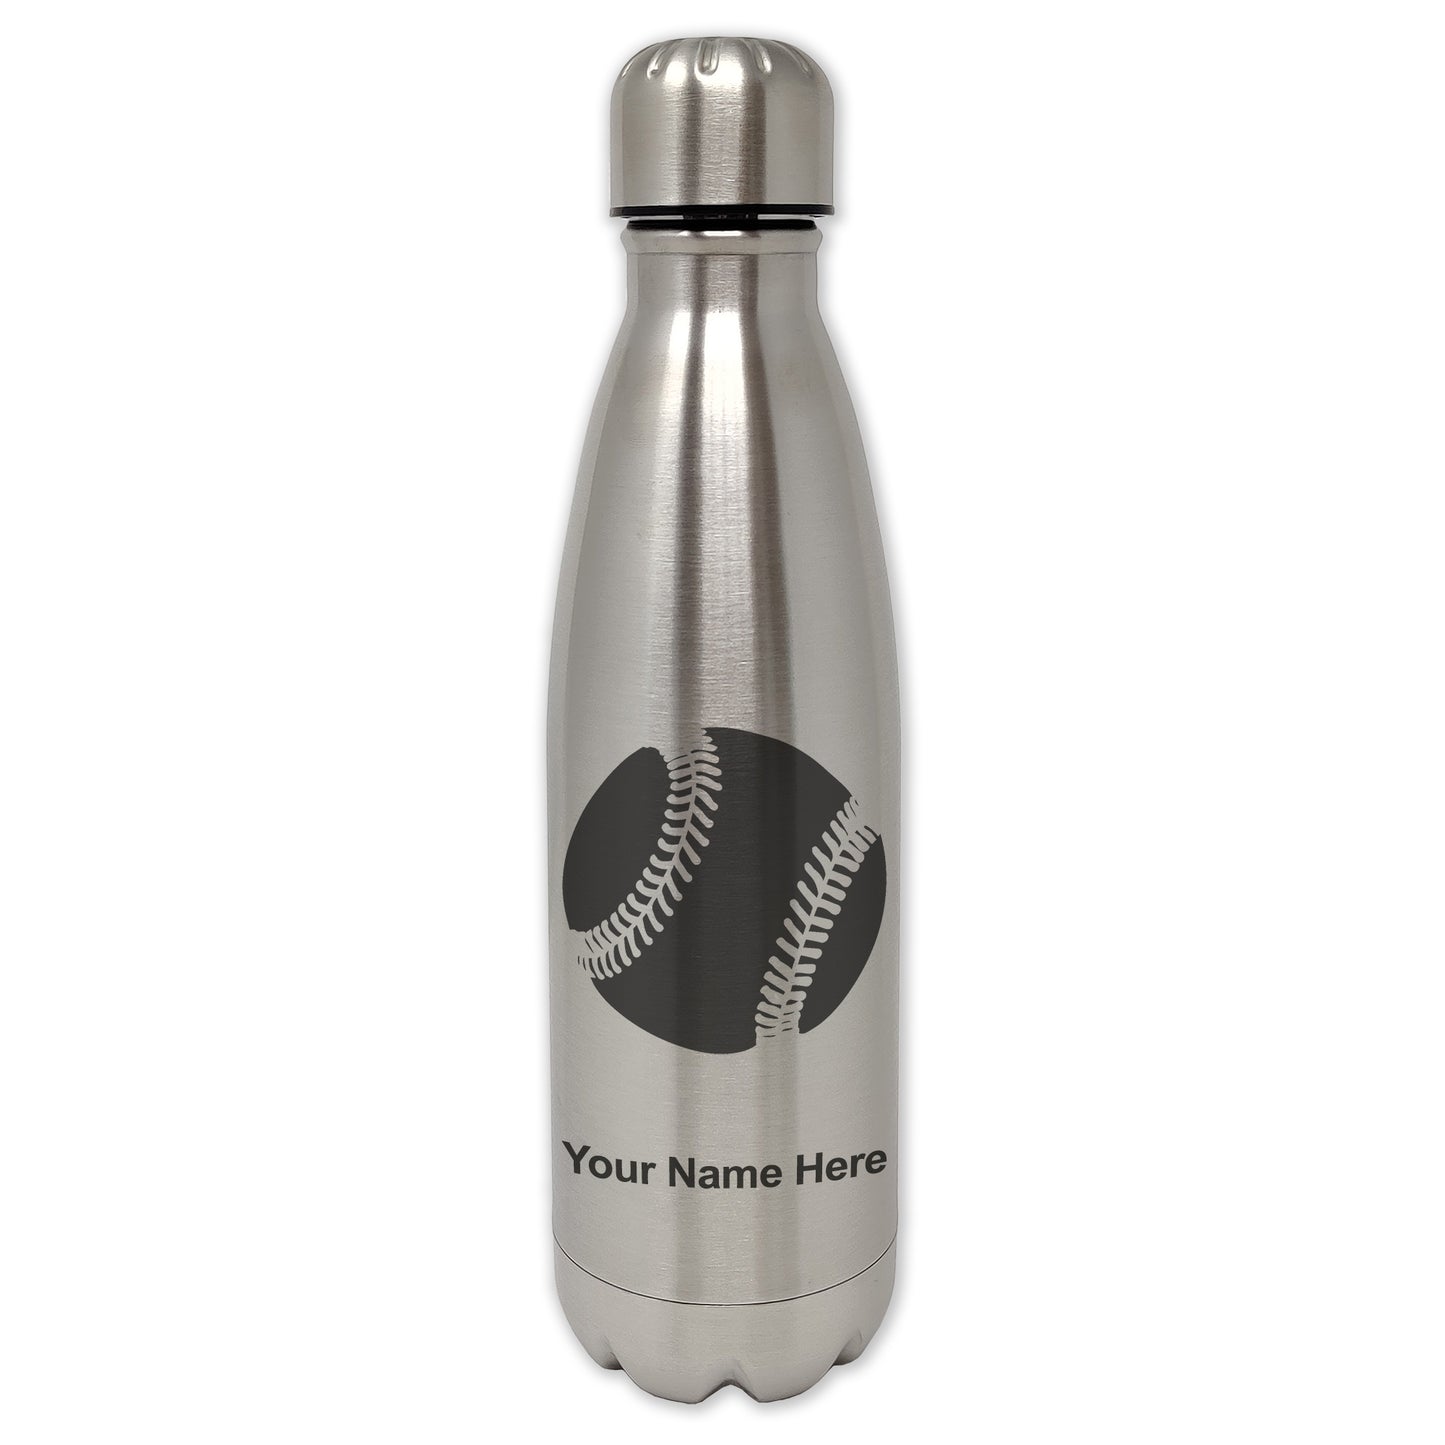 LaserGram Single Wall Water Bottle, Baseball Ball, Personalized Engraving Included